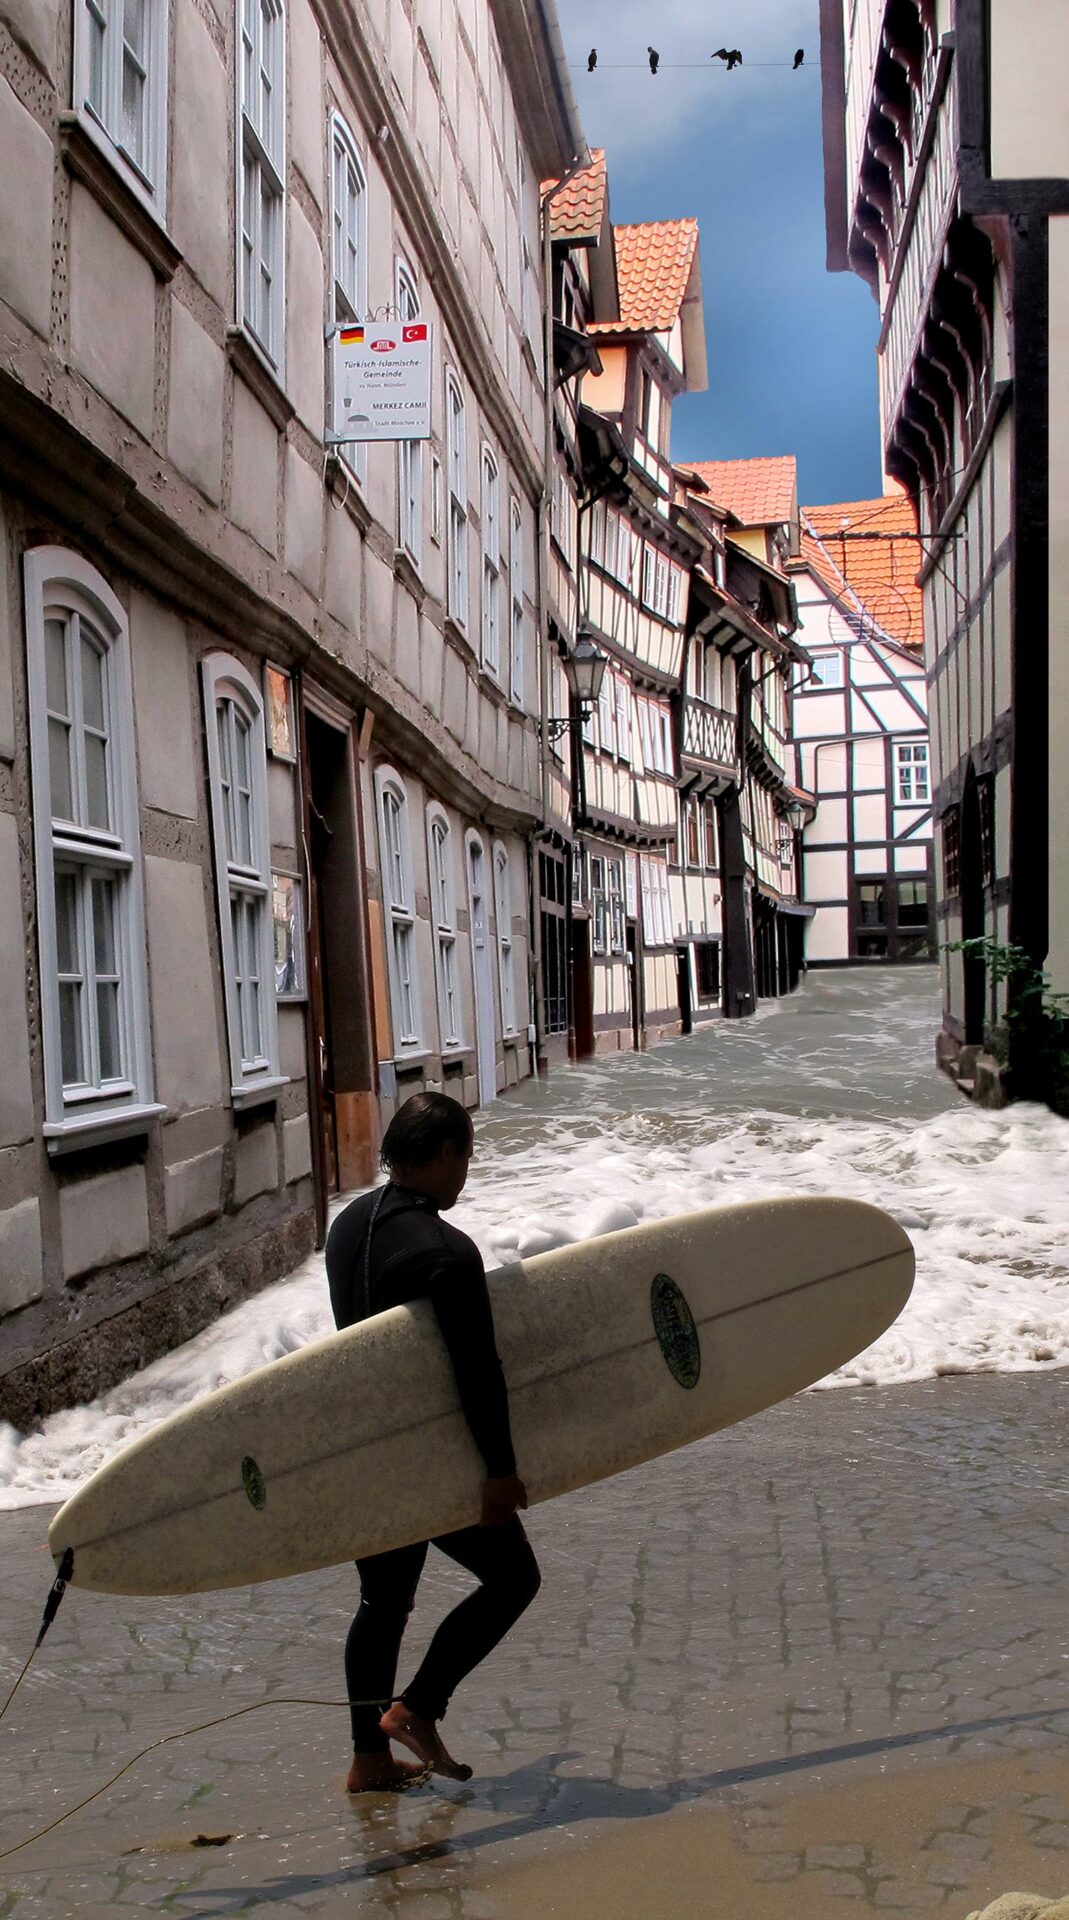 A man carrying a surfboard on a flooded street.